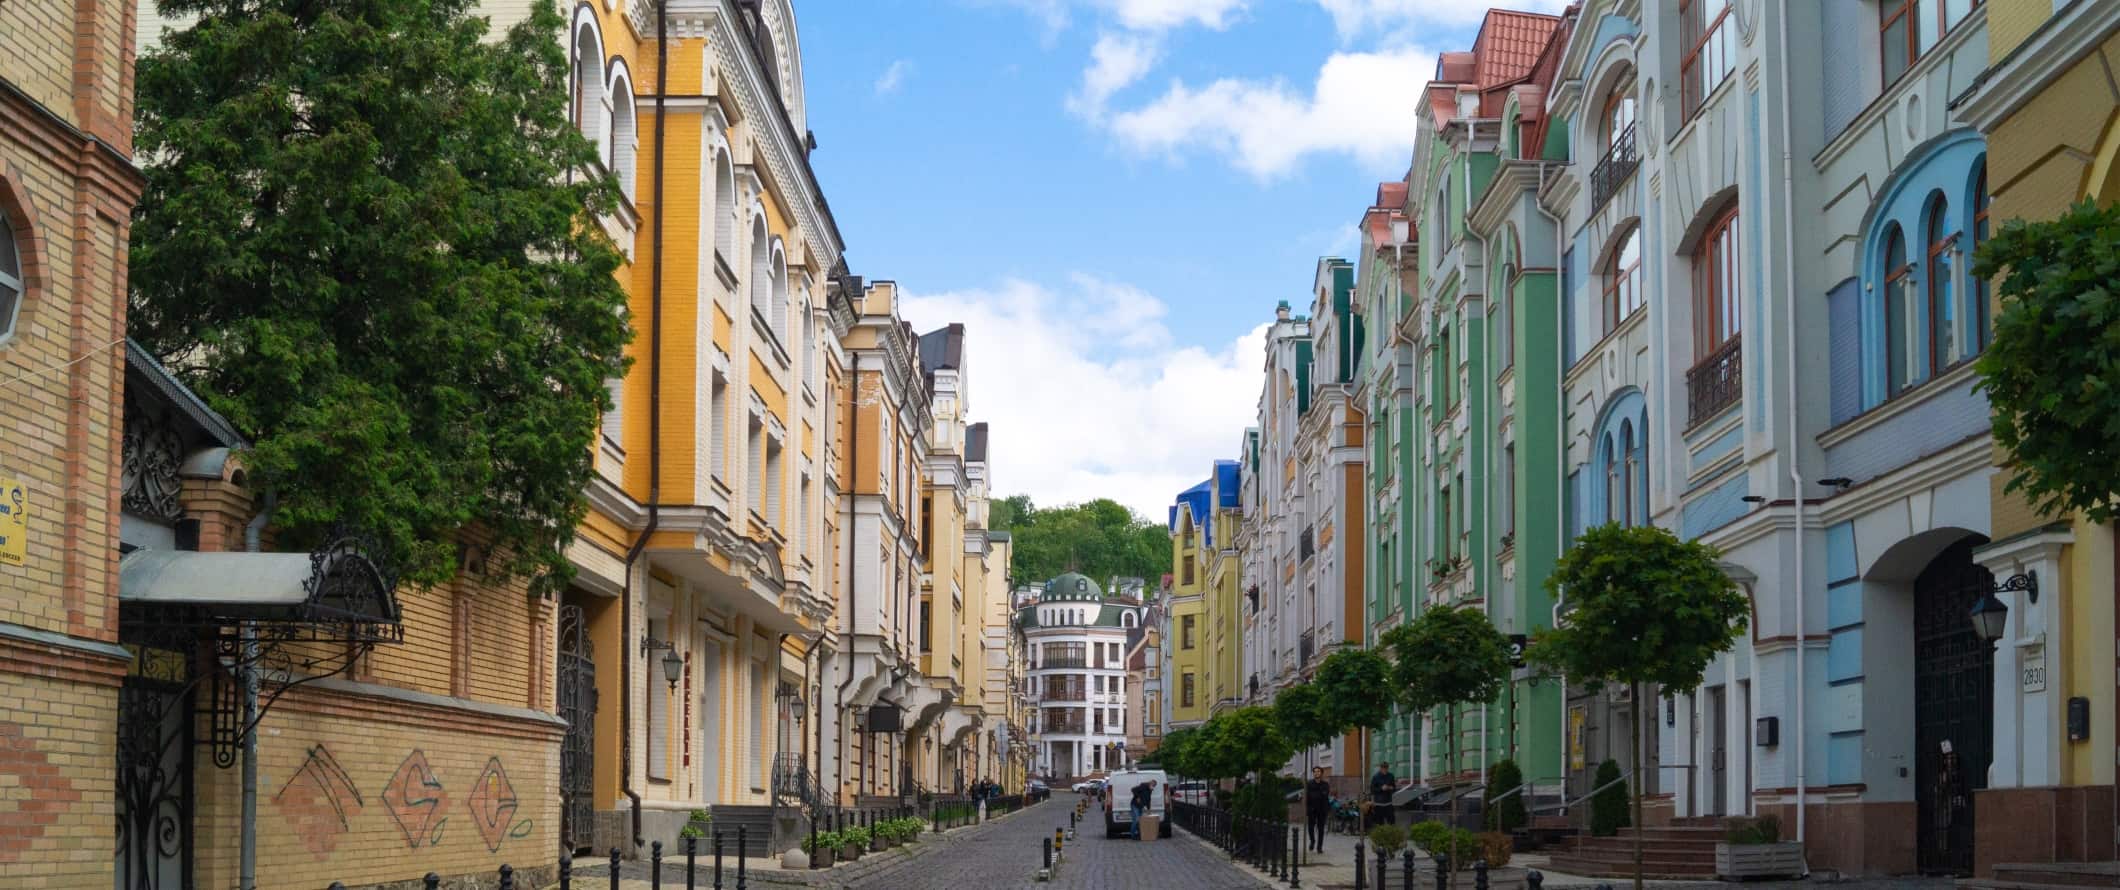 Street lined with brightly colored buildings in Kyiv, Ukraine